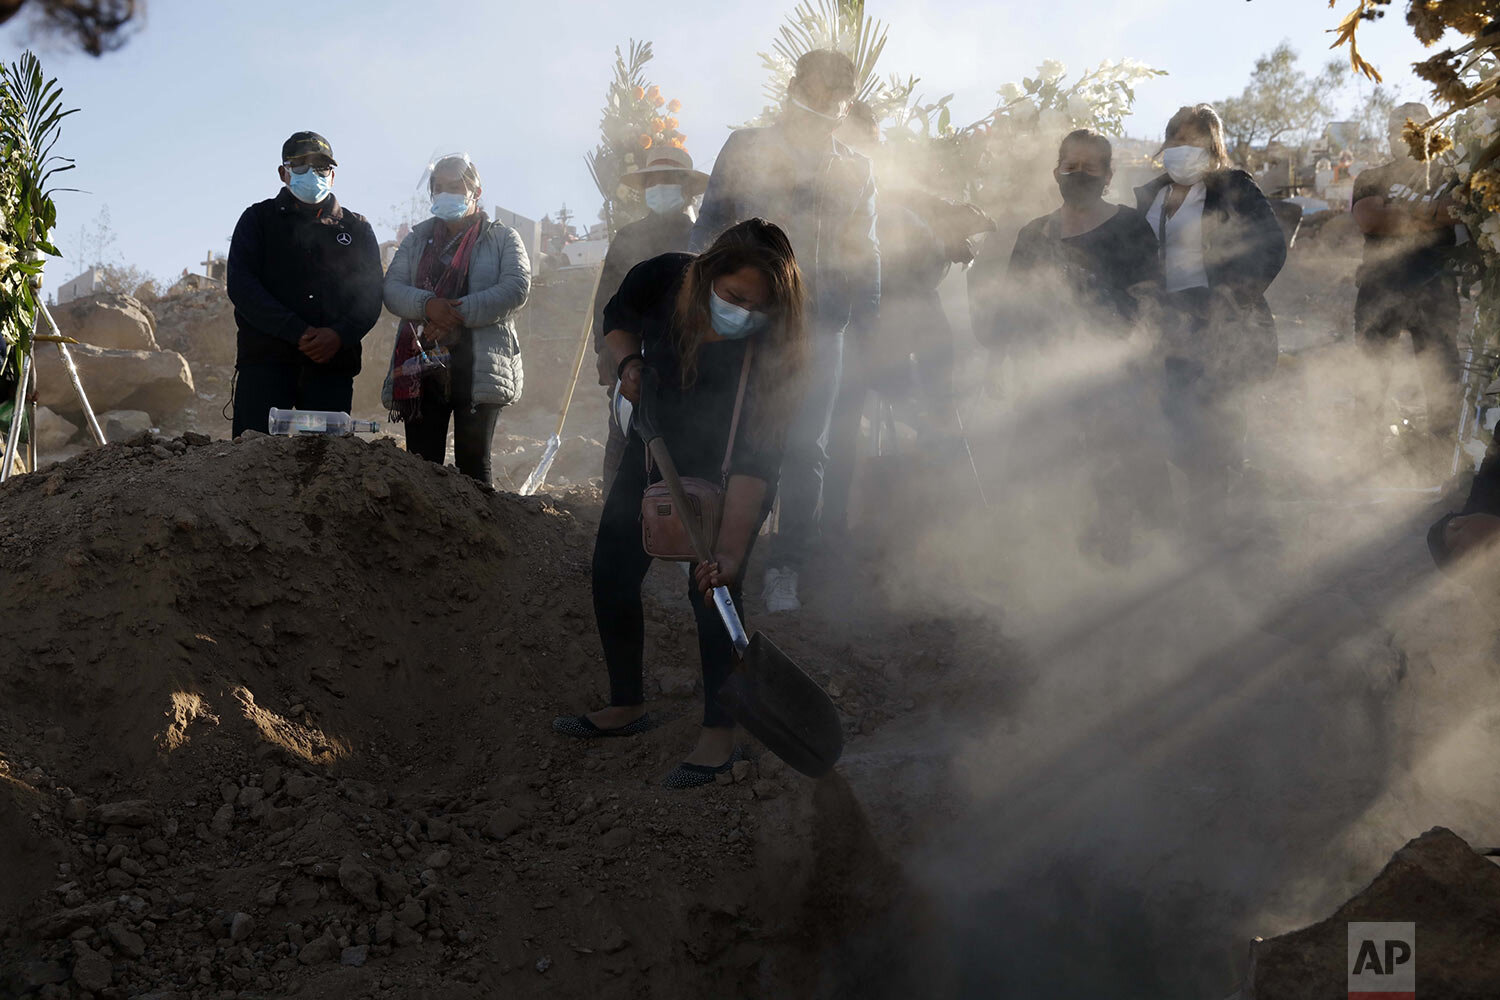  A person shovels dirt into the grave of their family member, Giro Quispe, who died from complications related to COVID-19 at El Cebollar cemetery in Arequipa, Peru, June 25, 2021, during a strict city lockdown. (AP Photo/Guadalupe Pardo) 